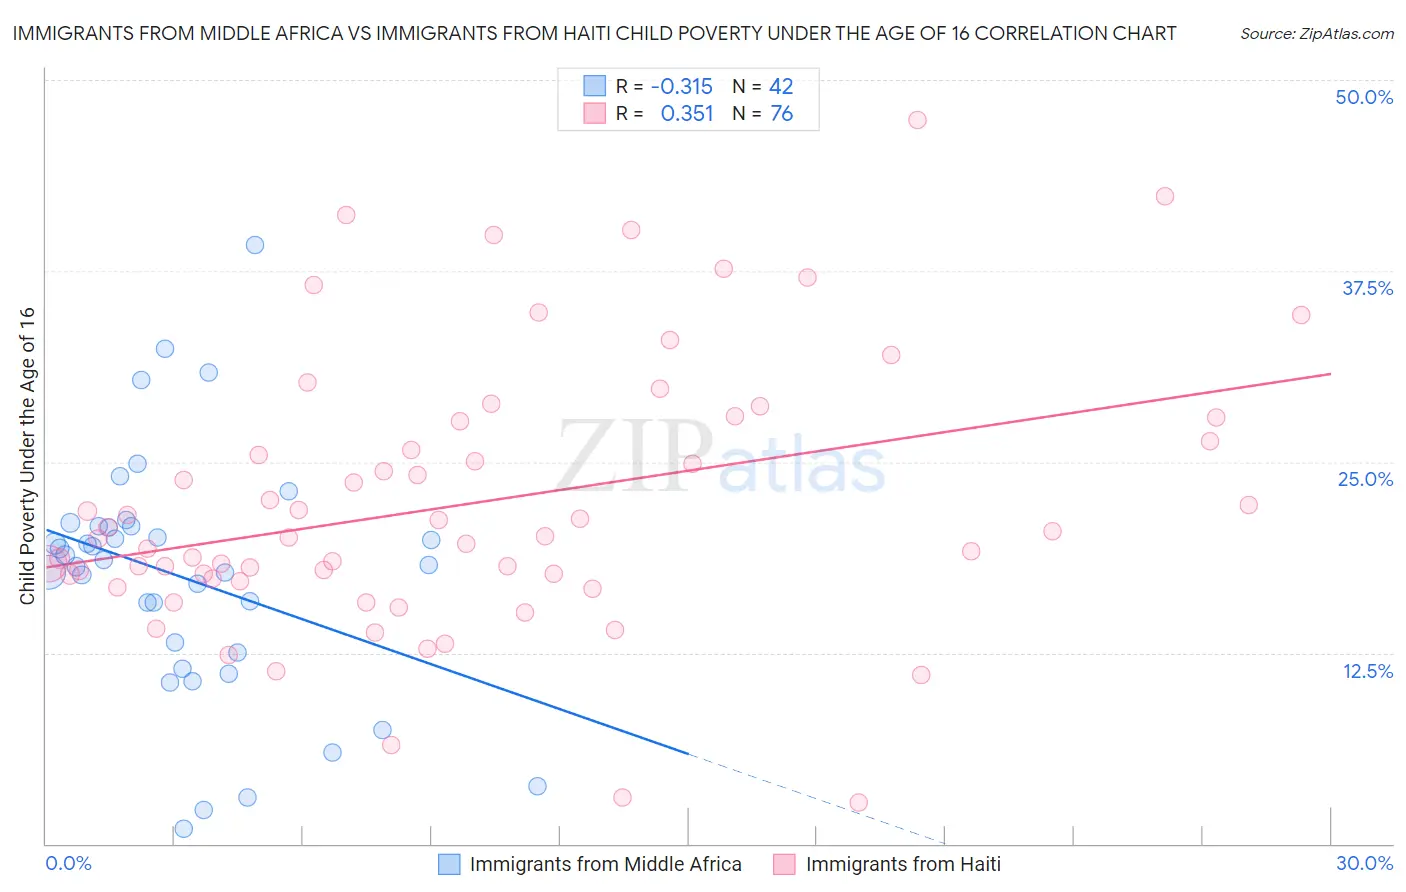 Immigrants from Middle Africa vs Immigrants from Haiti Child Poverty Under the Age of 16